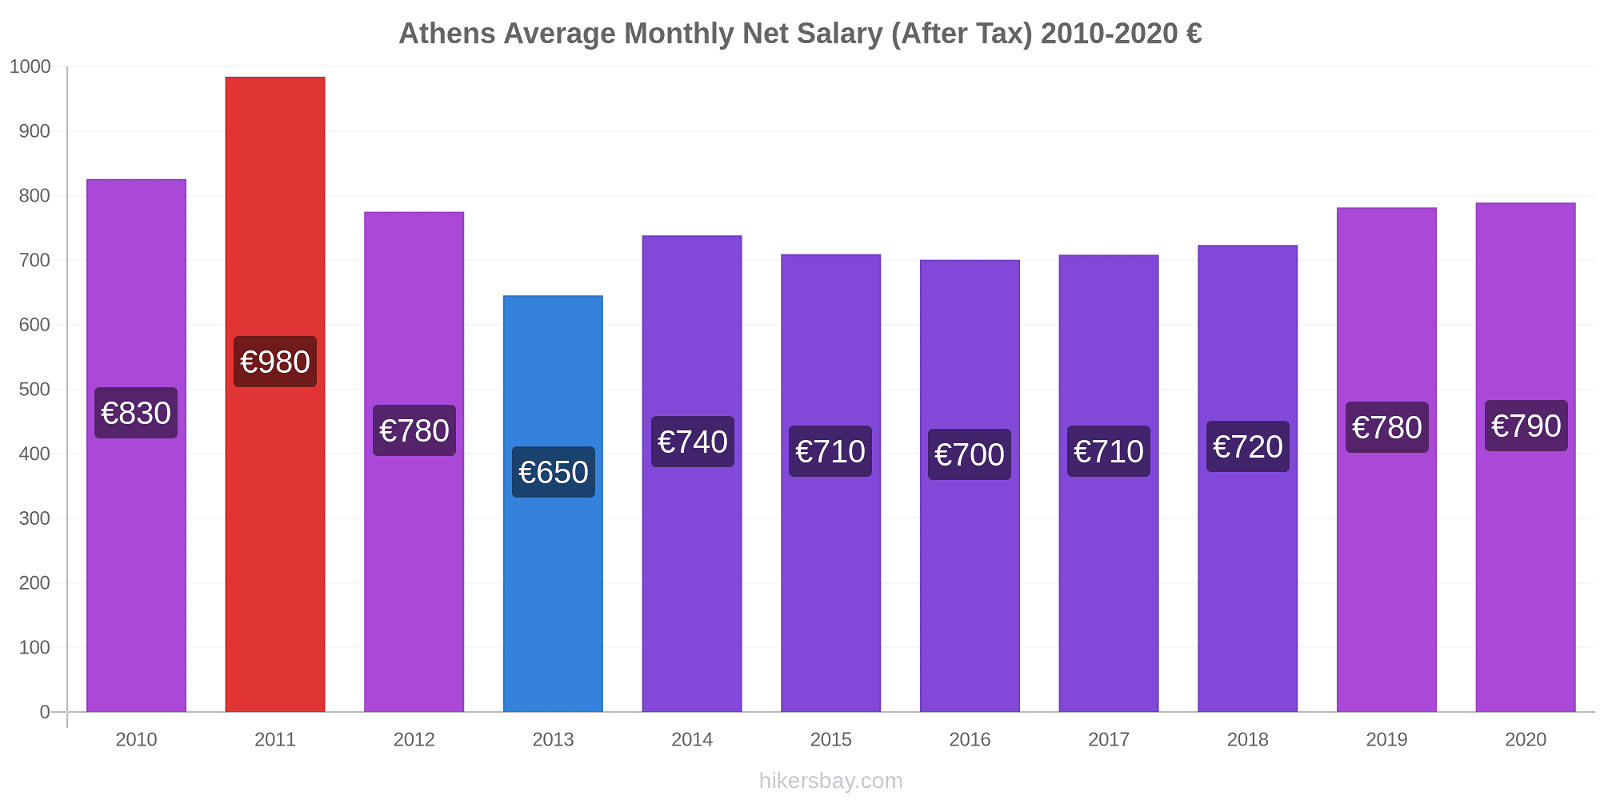 Athens price changes Average Monthly Net Salary (After Tax) hikersbay.com